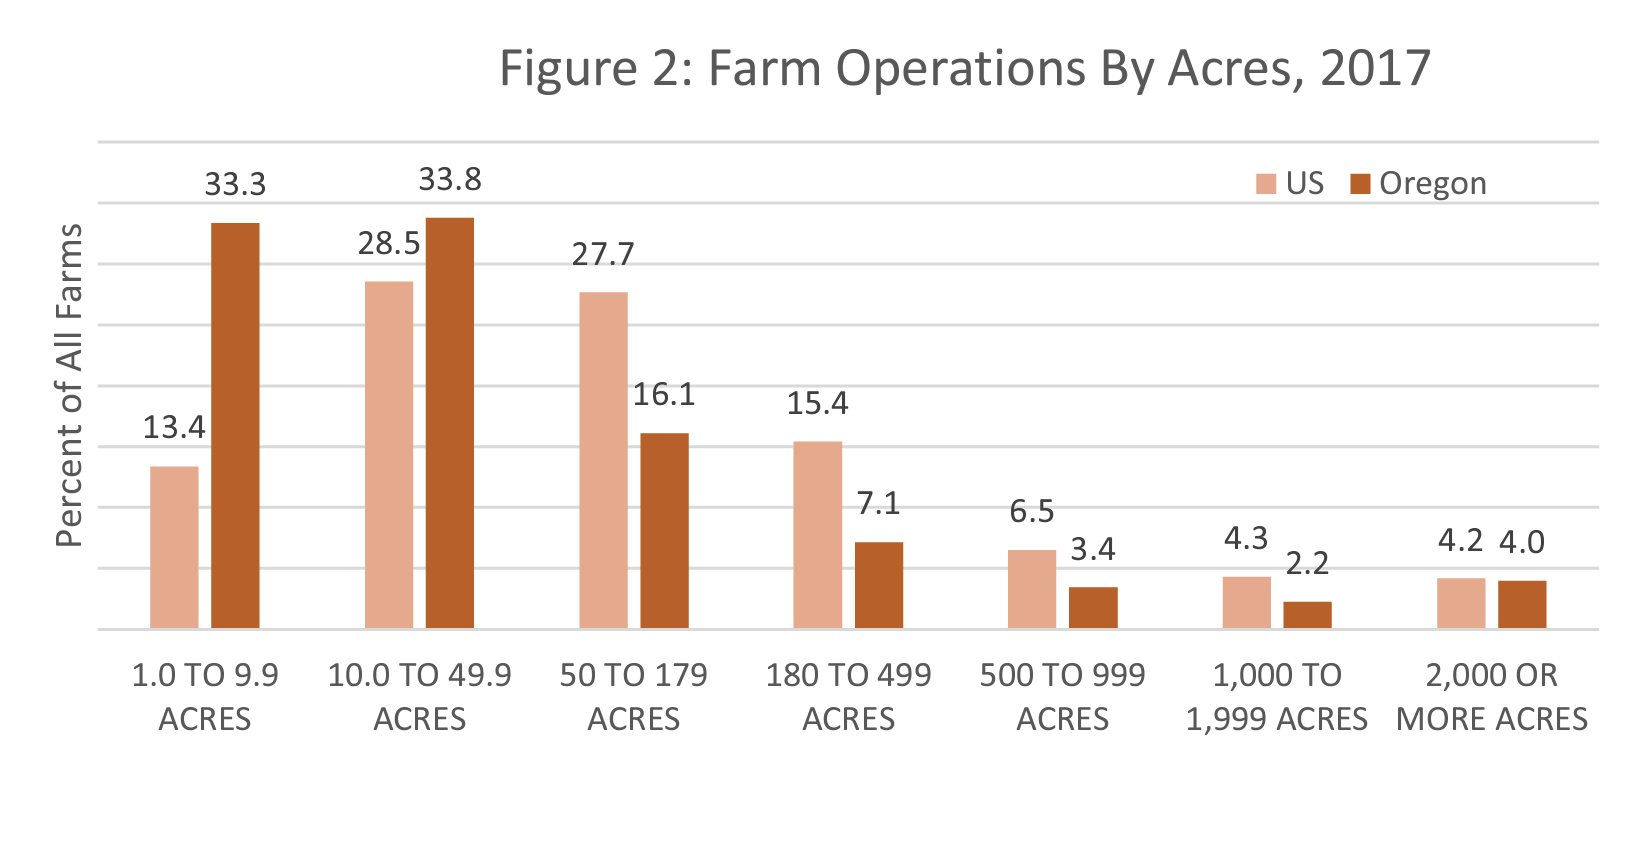 Farm operations by acres. Half of all Oregon farms are 20 acres or less. One-third of all farms are 9 acres or less.